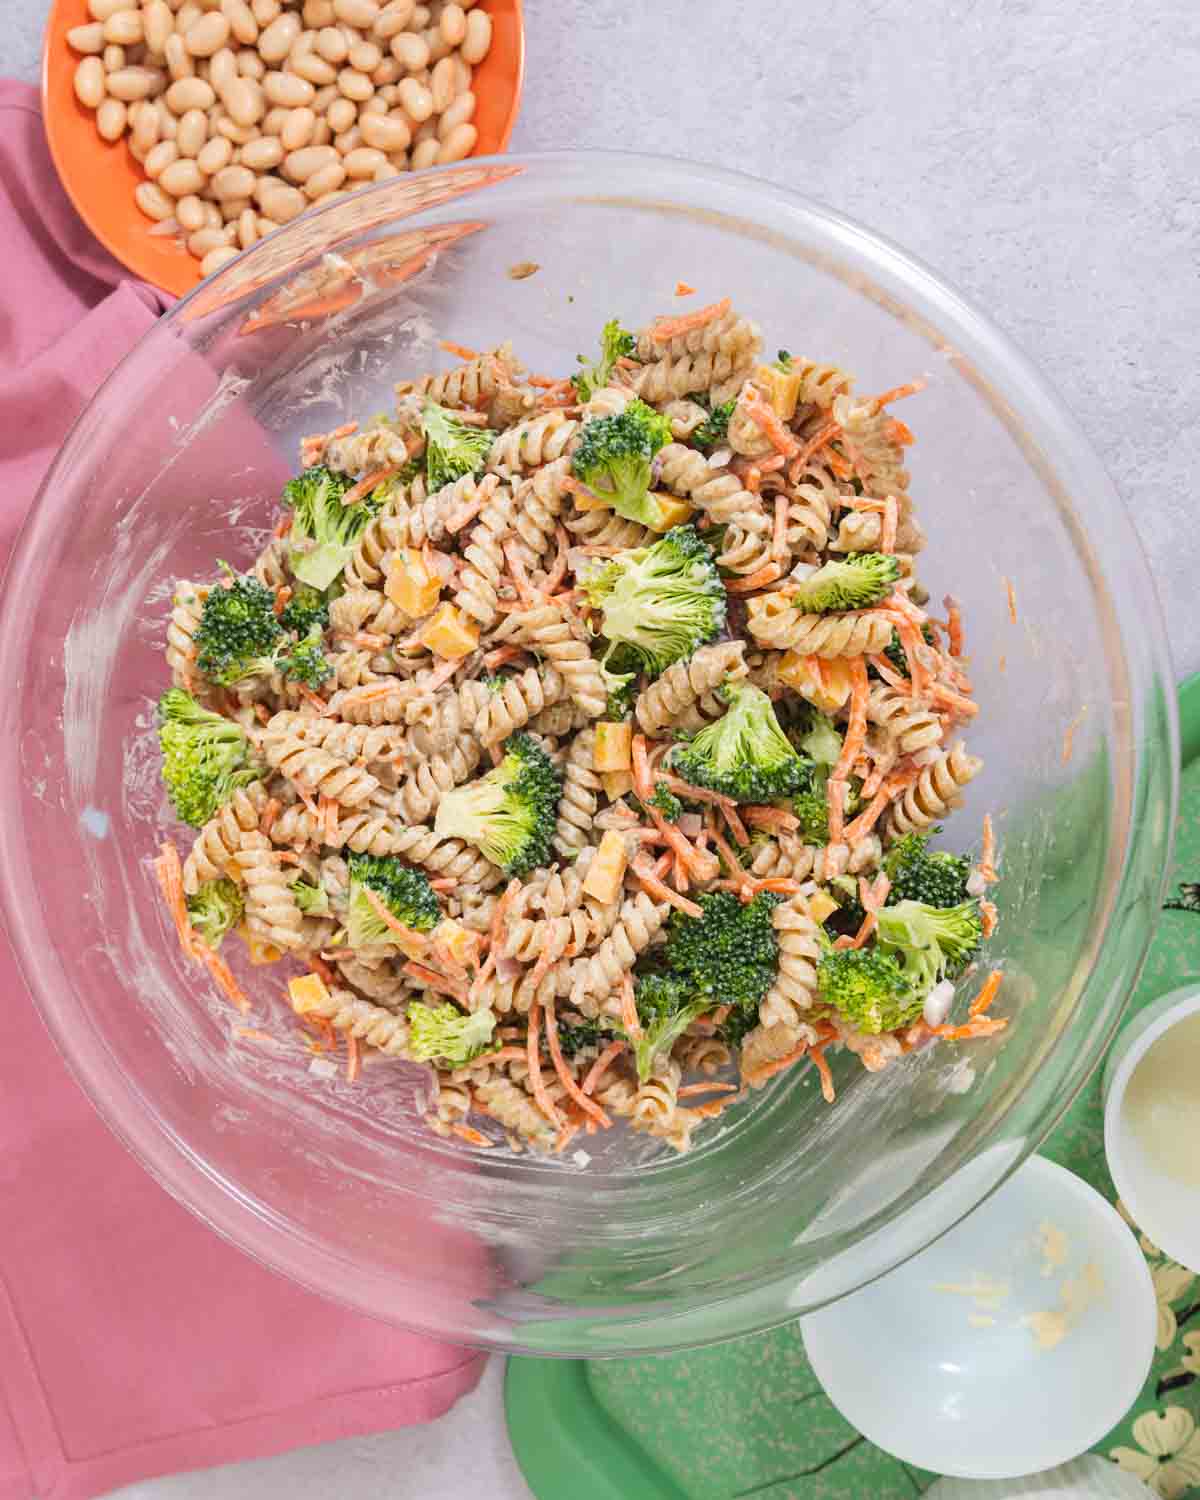 Large glass bowl filled with broccoli cheddar pasta salad.